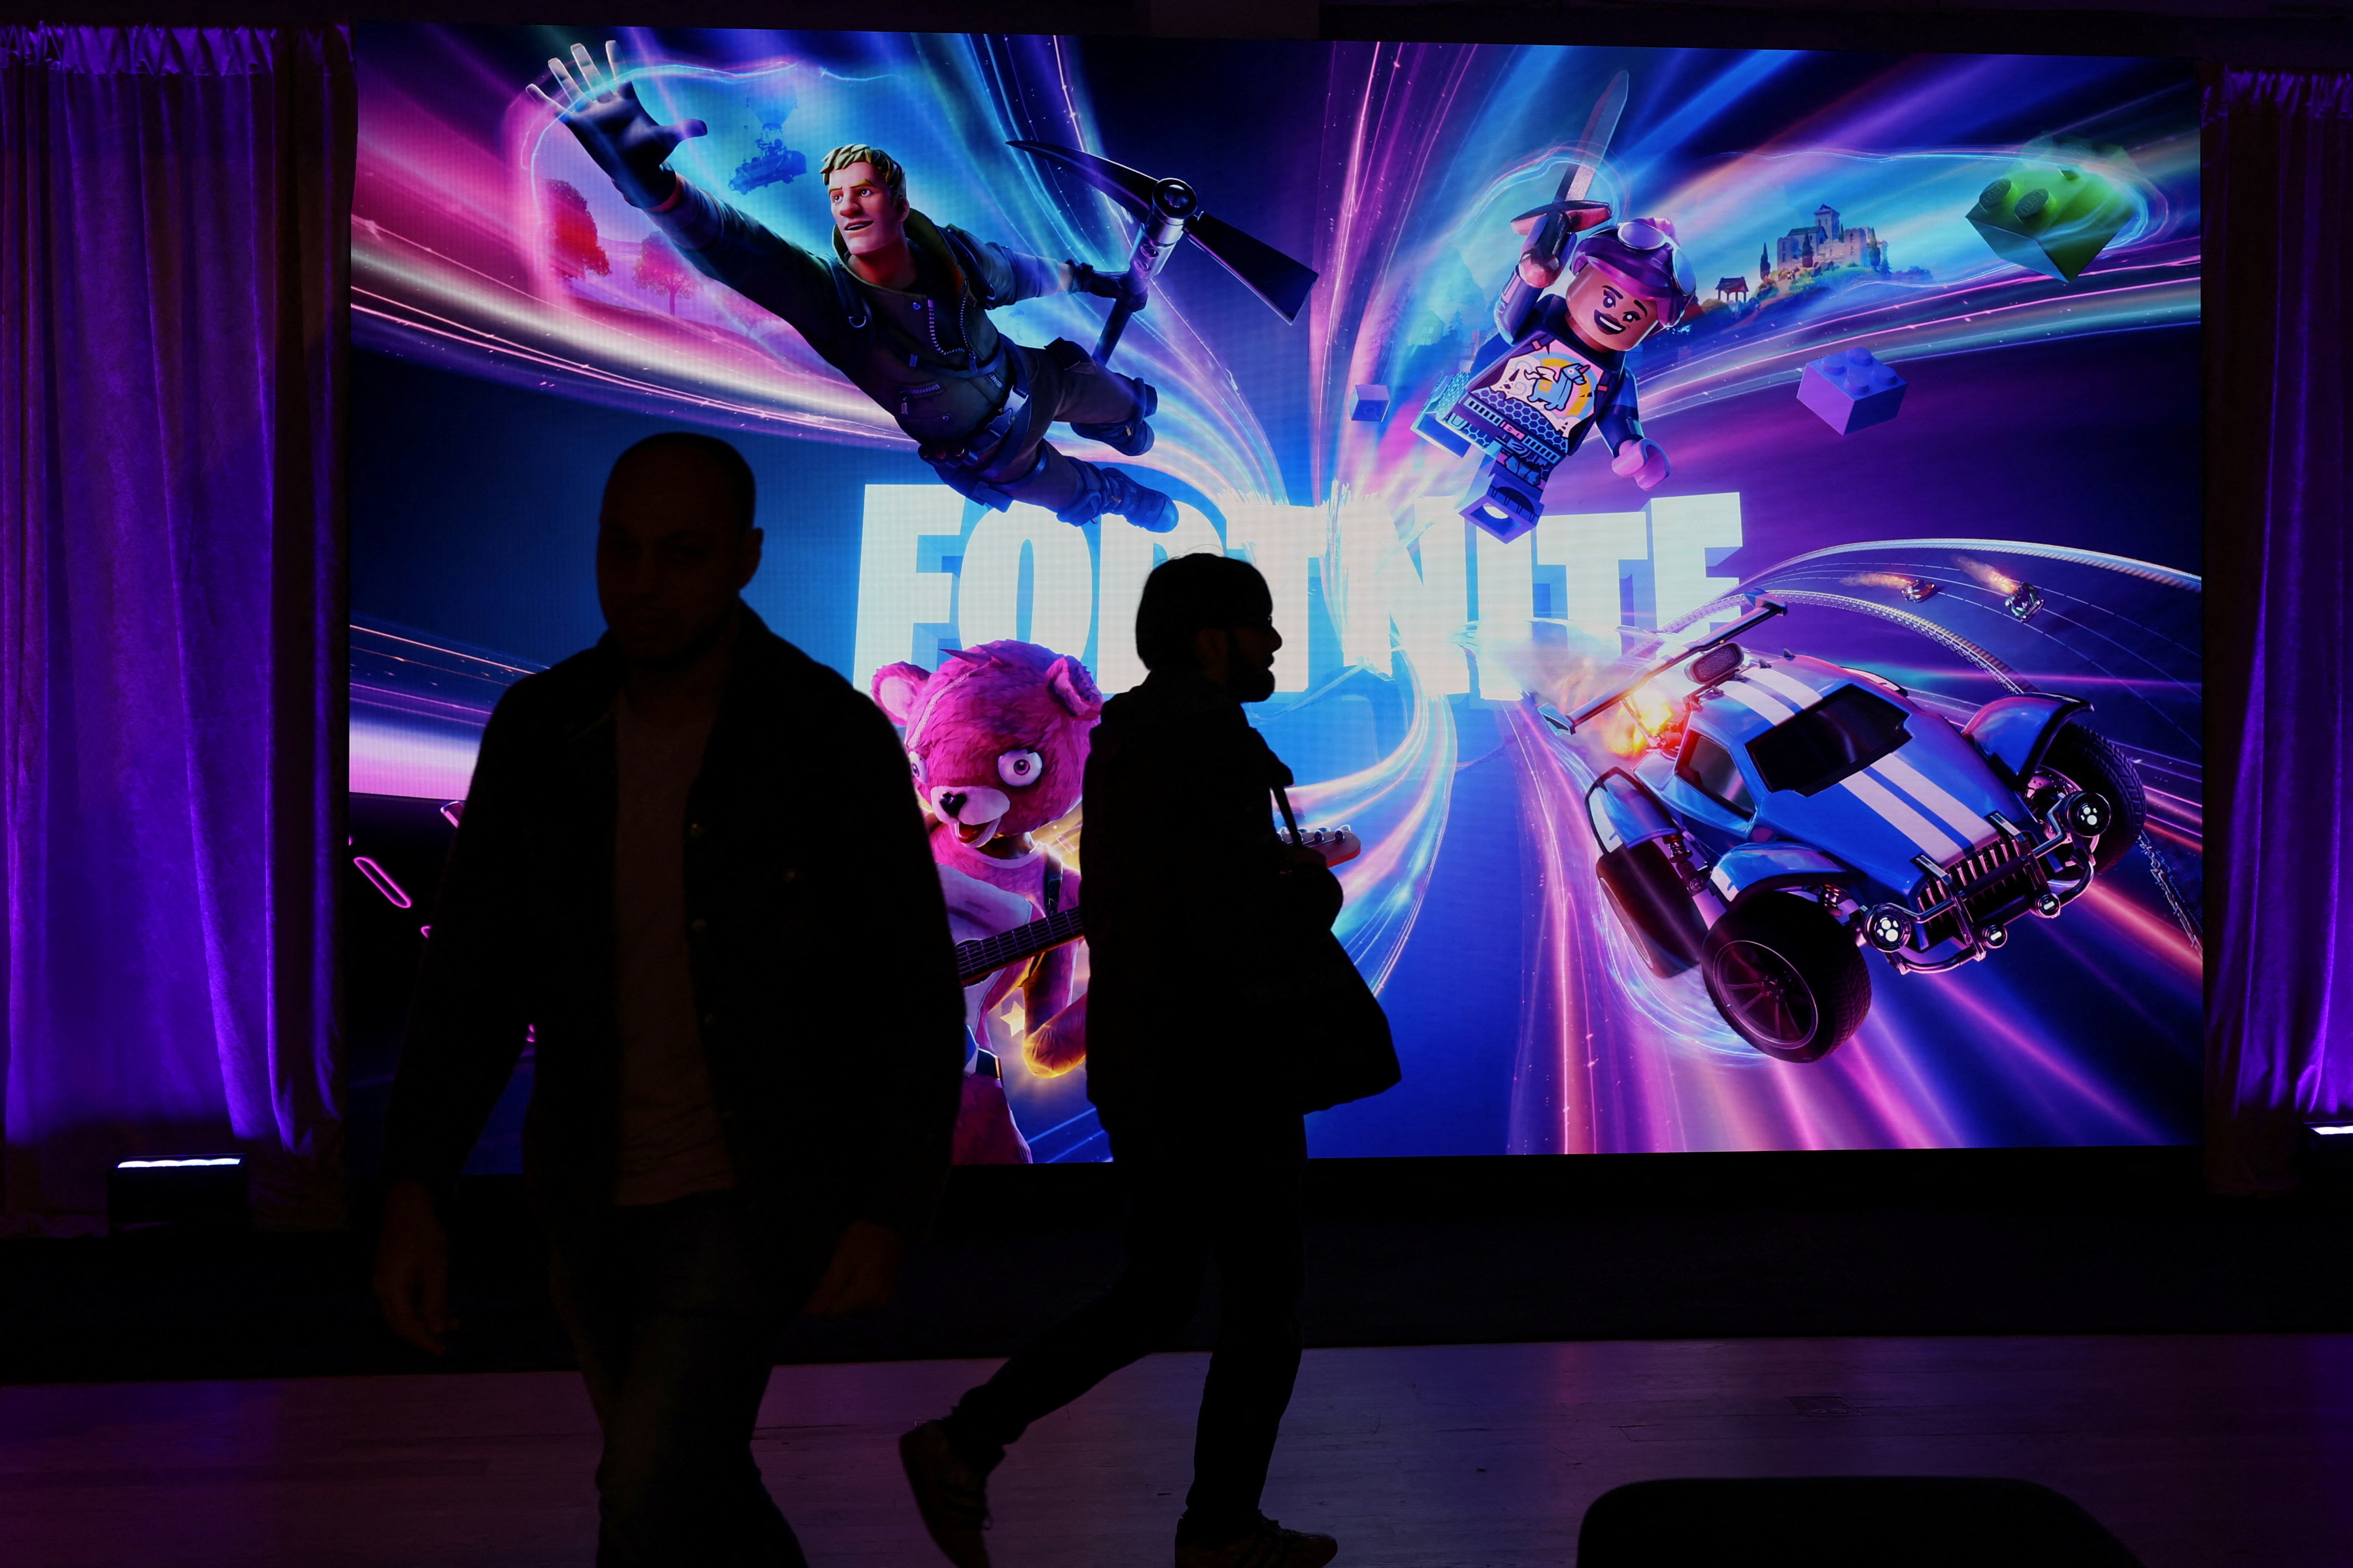 People in silhouette walk by a Fortnite gaming digital monitor during an event in New York City